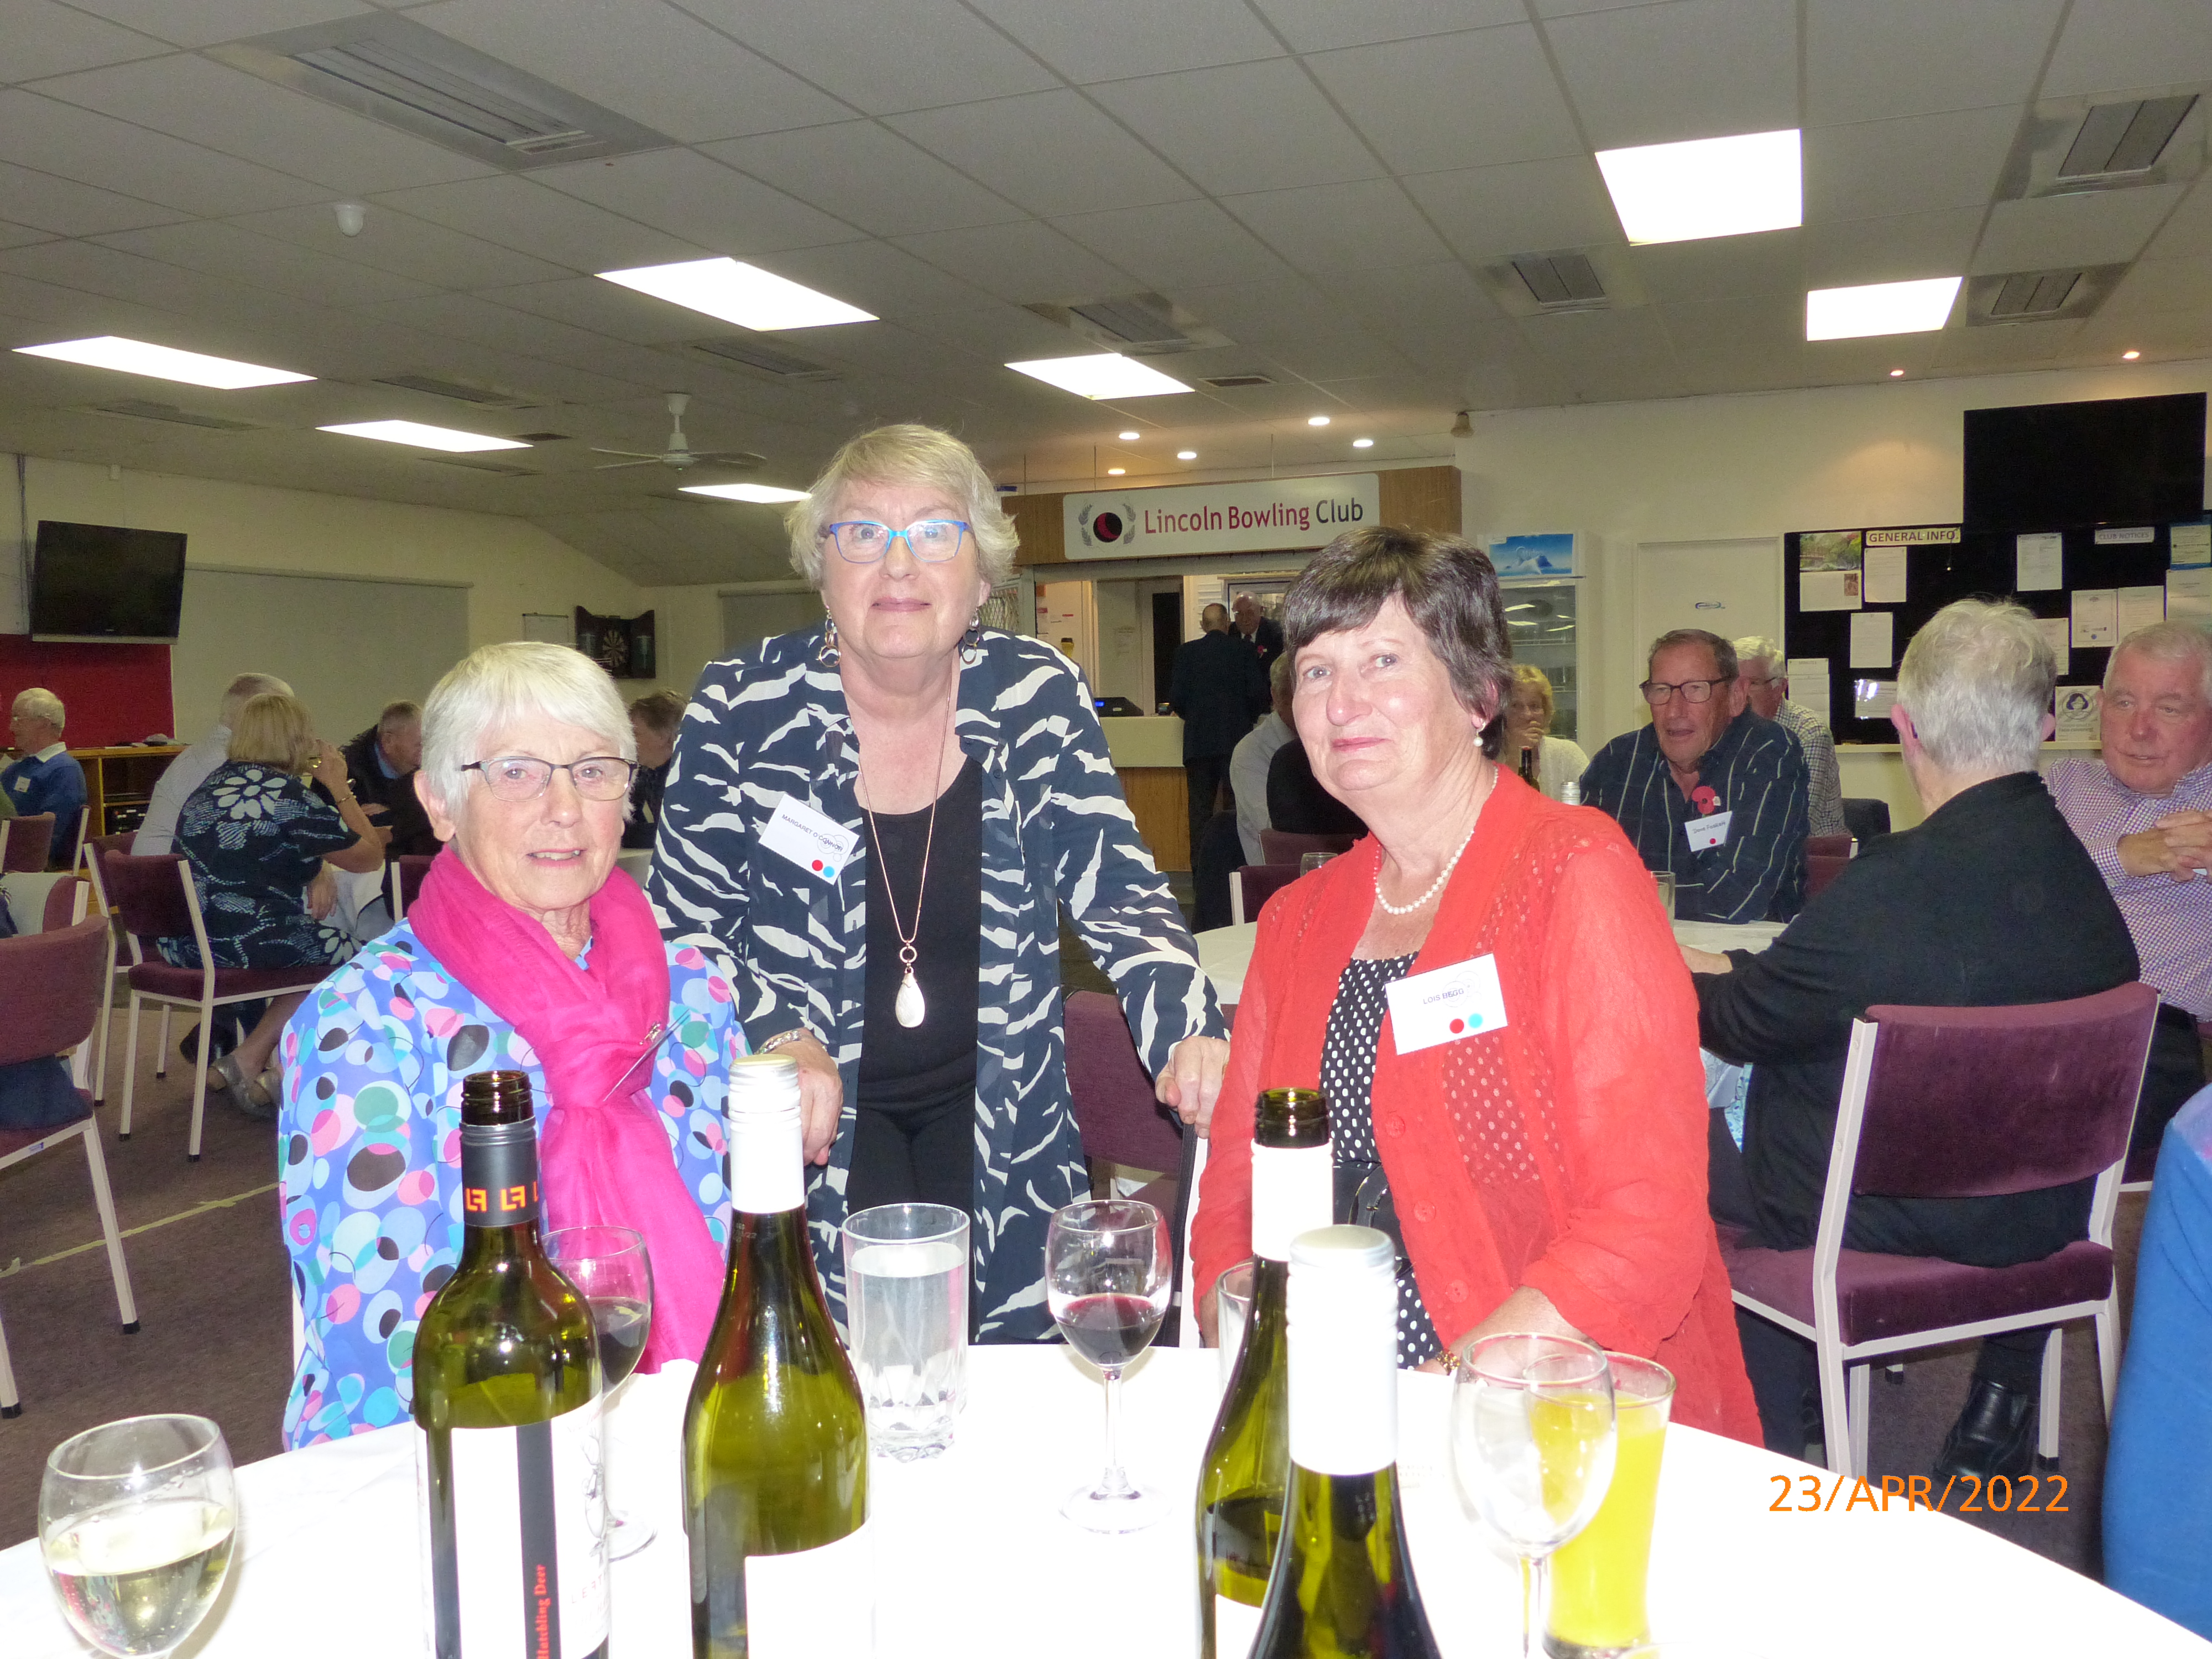 Margie Watson, Margaret O'Connor and Lois Begg